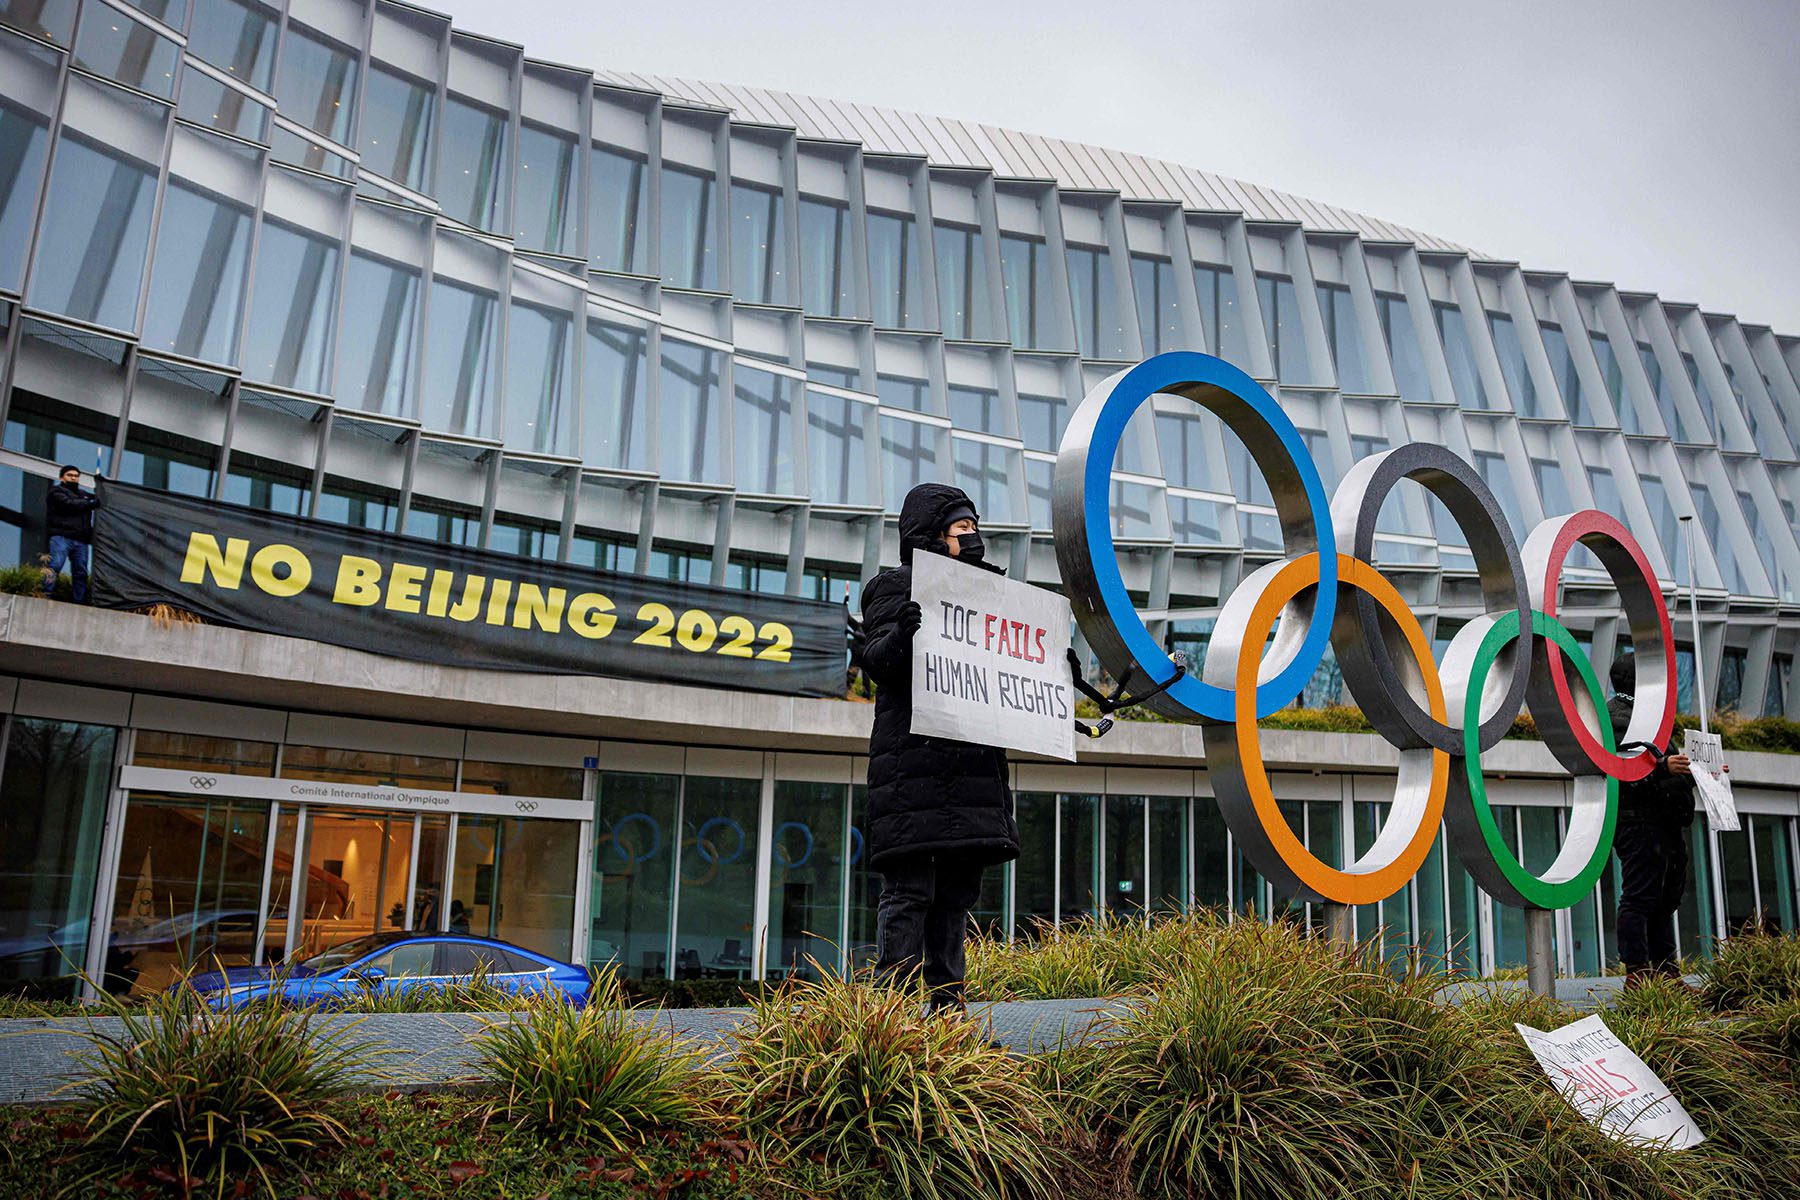 Activists hold banners that read "No Beijing 2022" and "IOC Fails Human Rights" in front of the IOC headquarters.